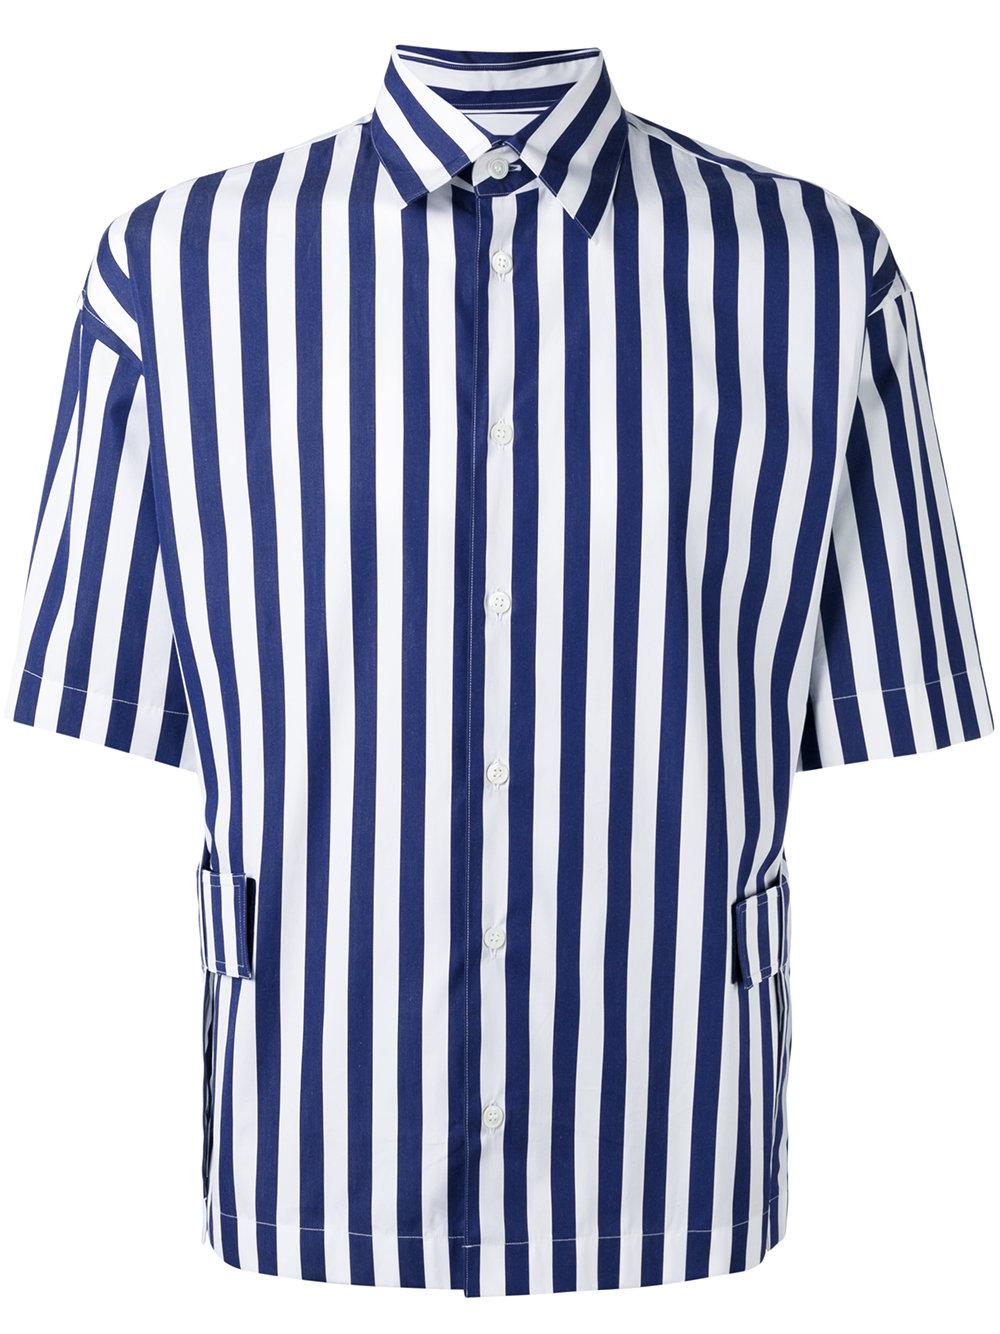 Marni Cotton Striped Short Sleeve Shirt in Blue for Men - Lyst